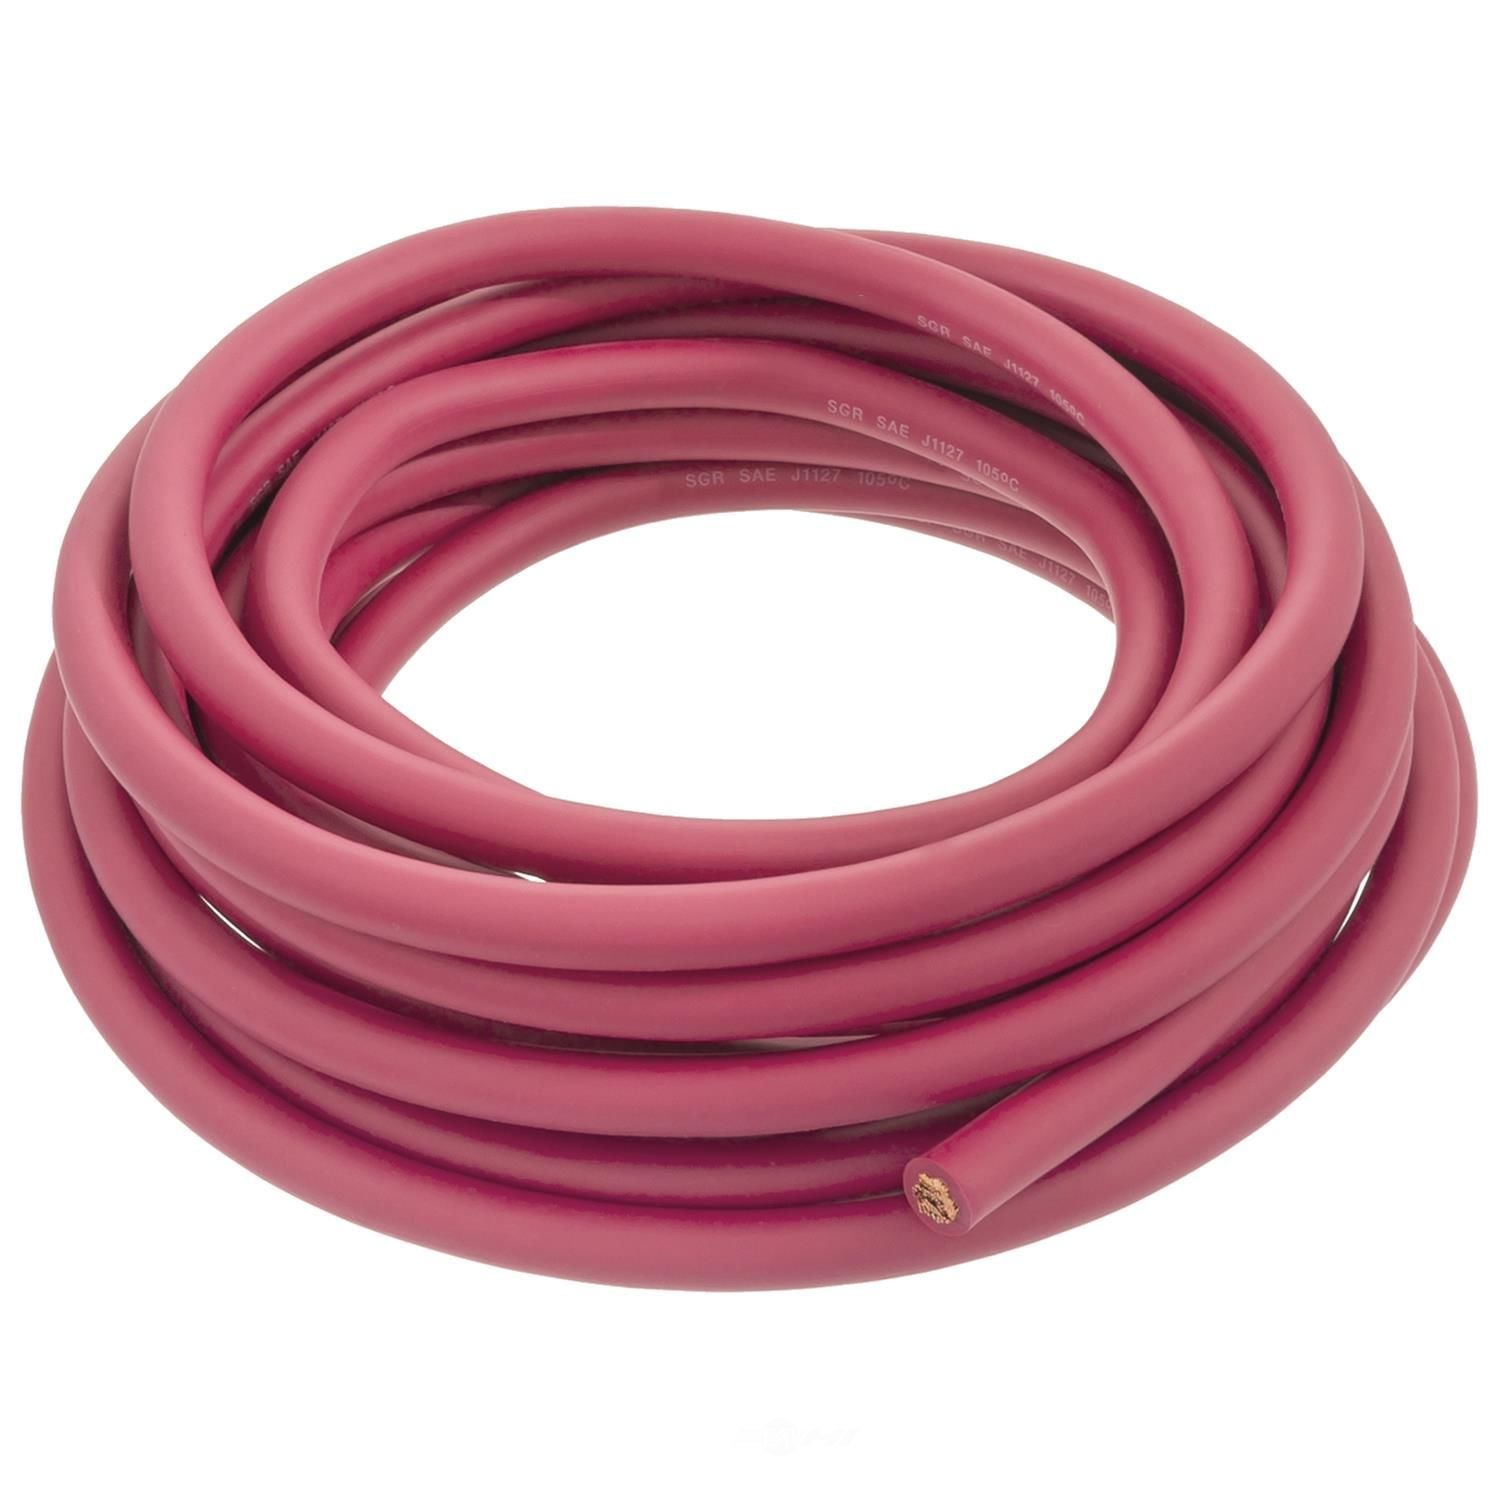 YSP CB14RD-25 Wells Bulk Cable (Red, 25', 2G)